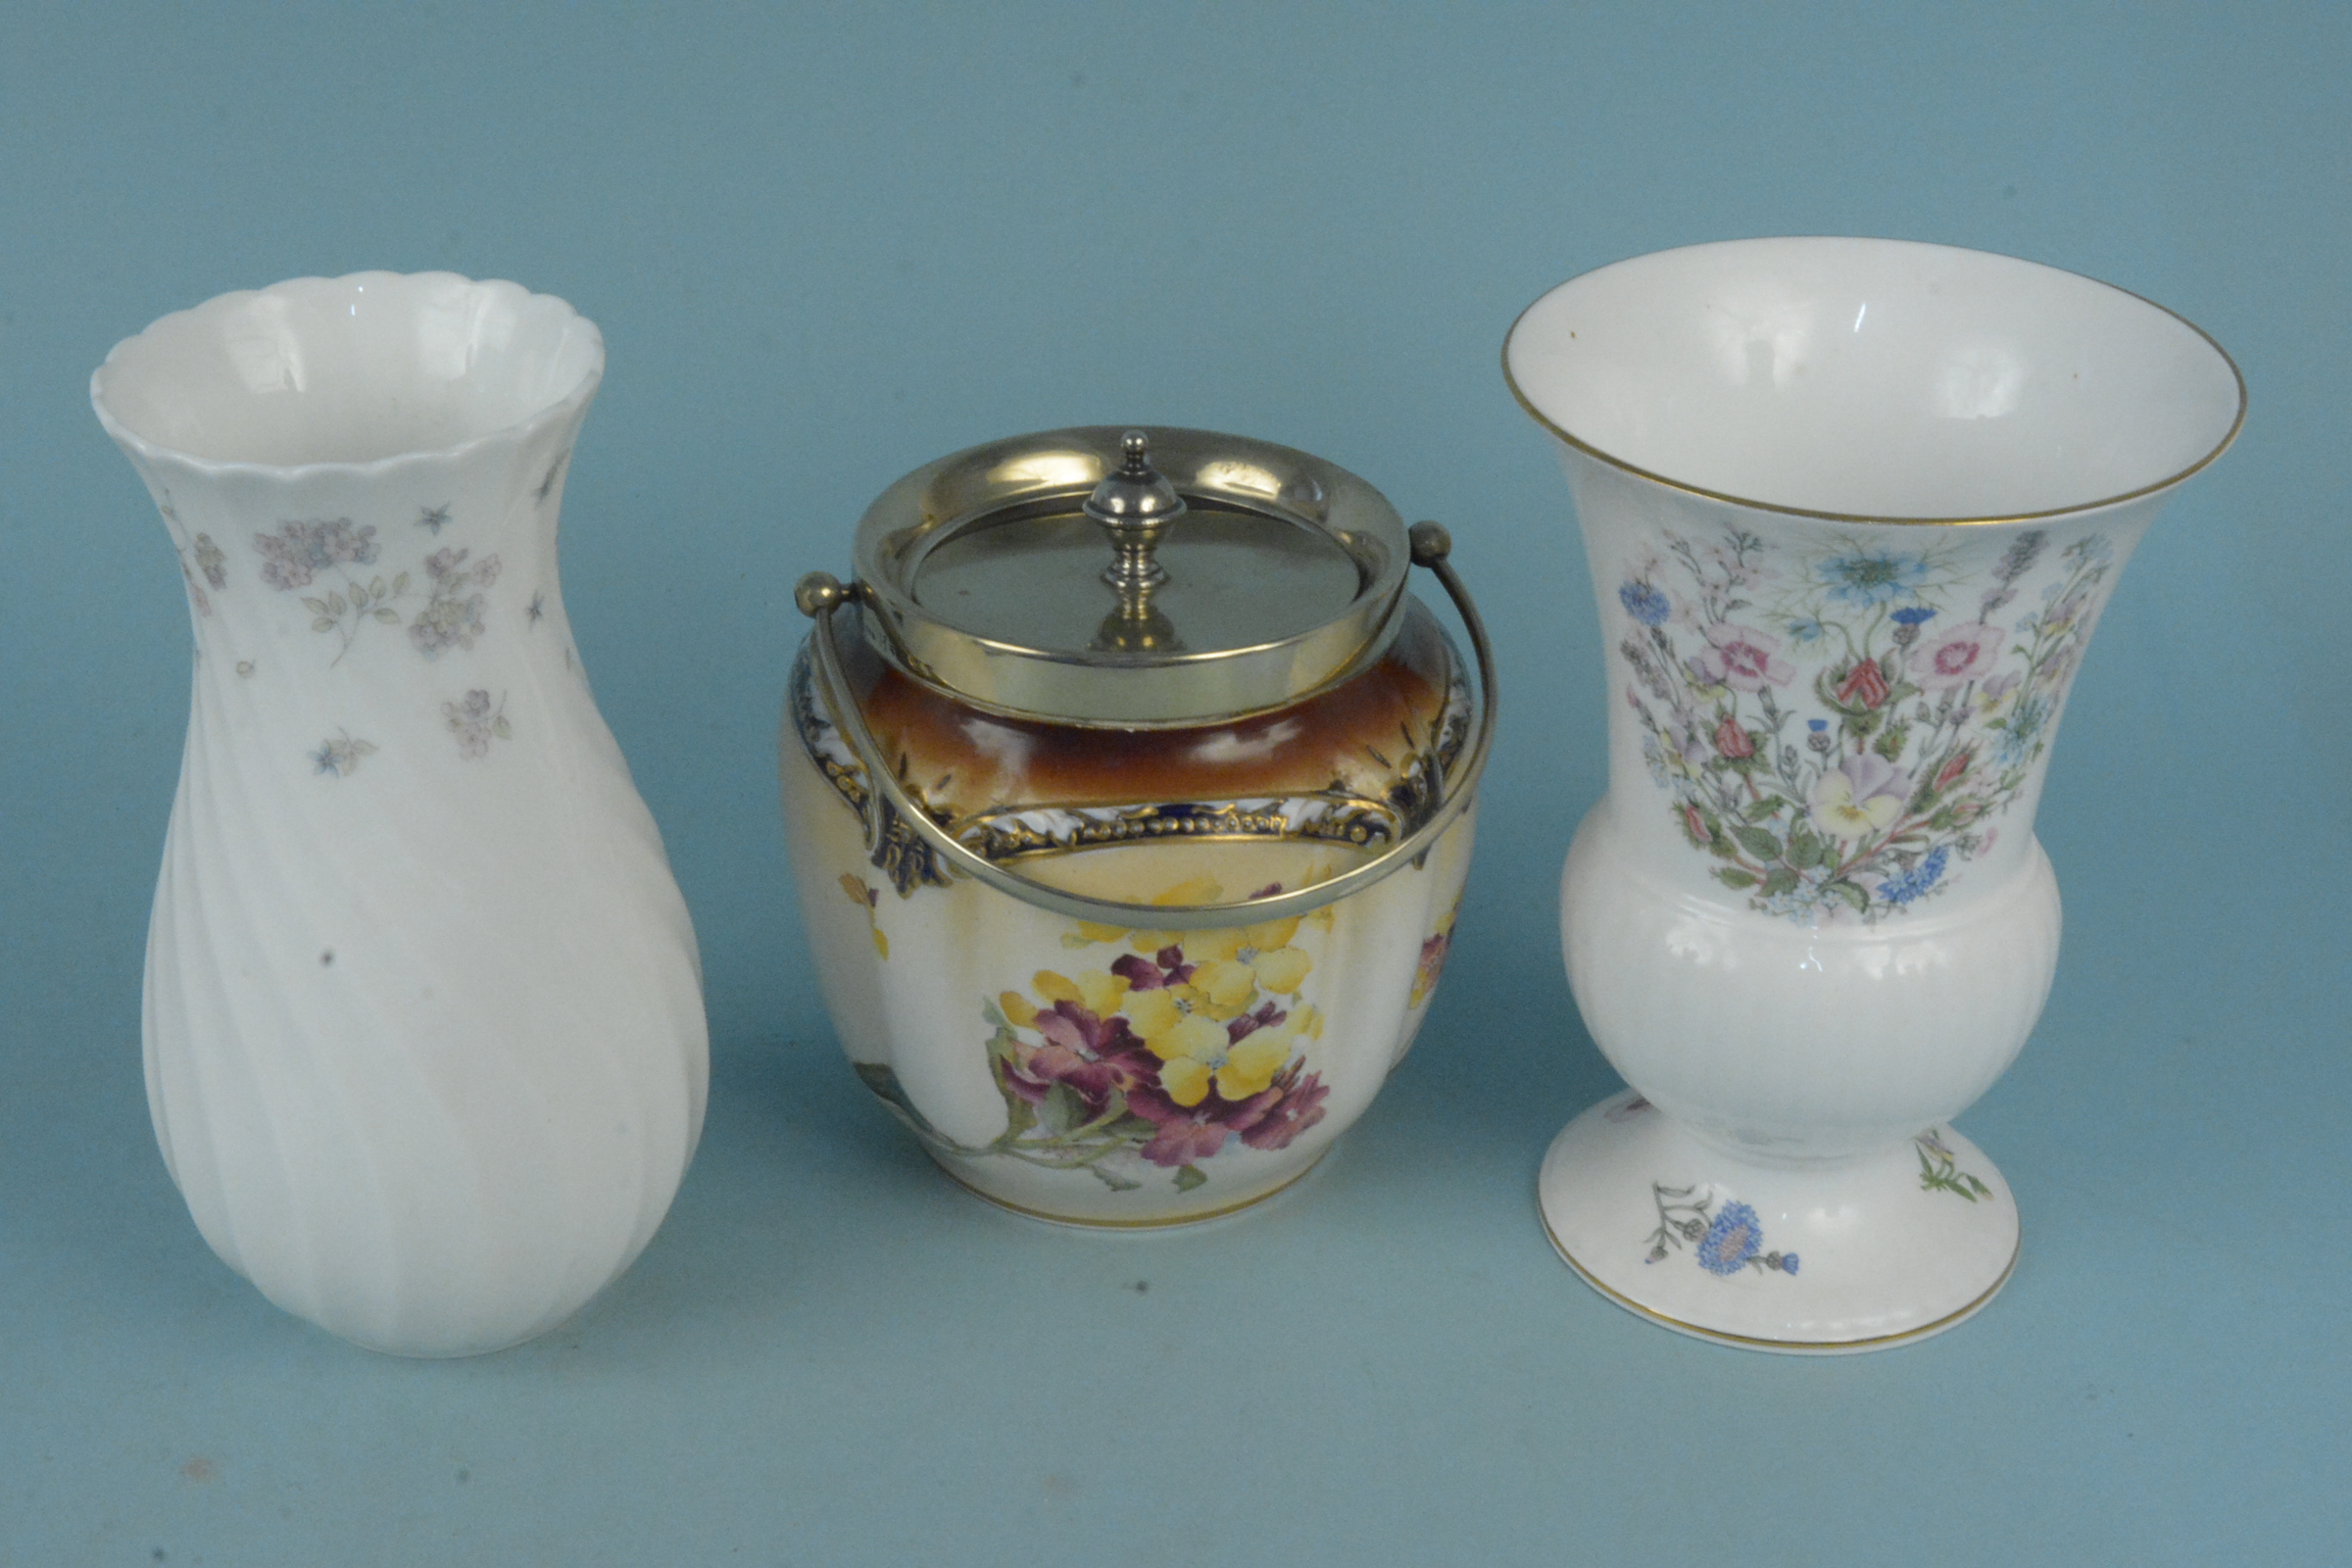 A mixed lot including a George Jones biscuit barrel, ceramic posies, cut glass bowls, - Image 3 of 3